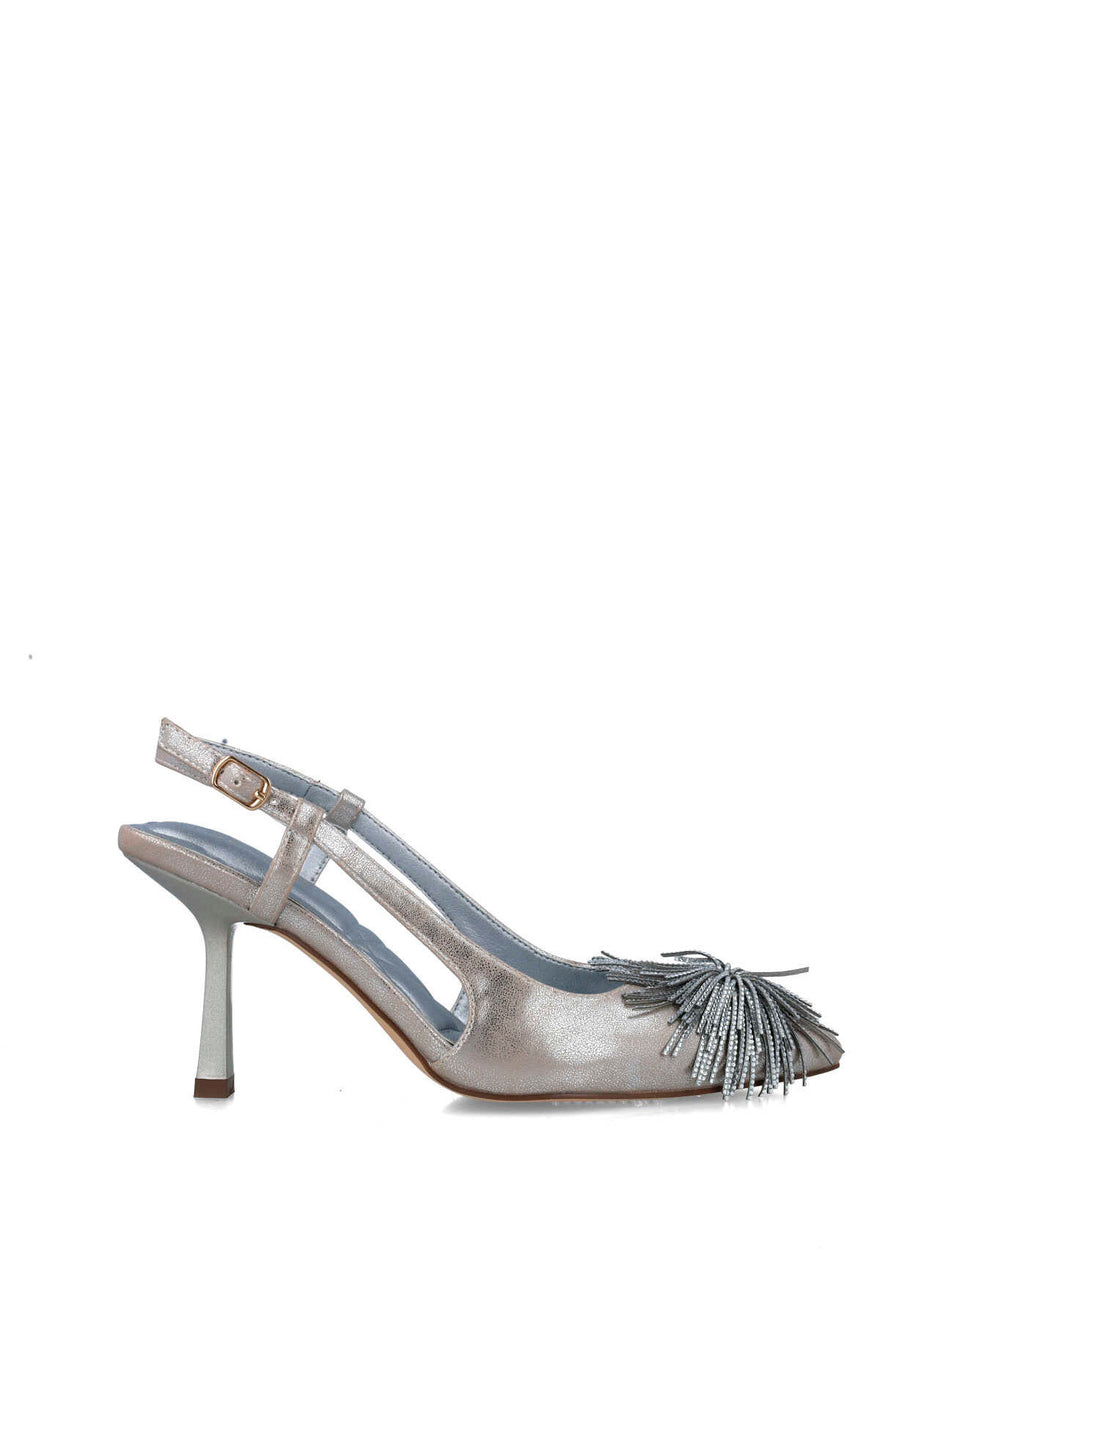 Silver Slingback Pumps With Fringe Piece_25409_09_01